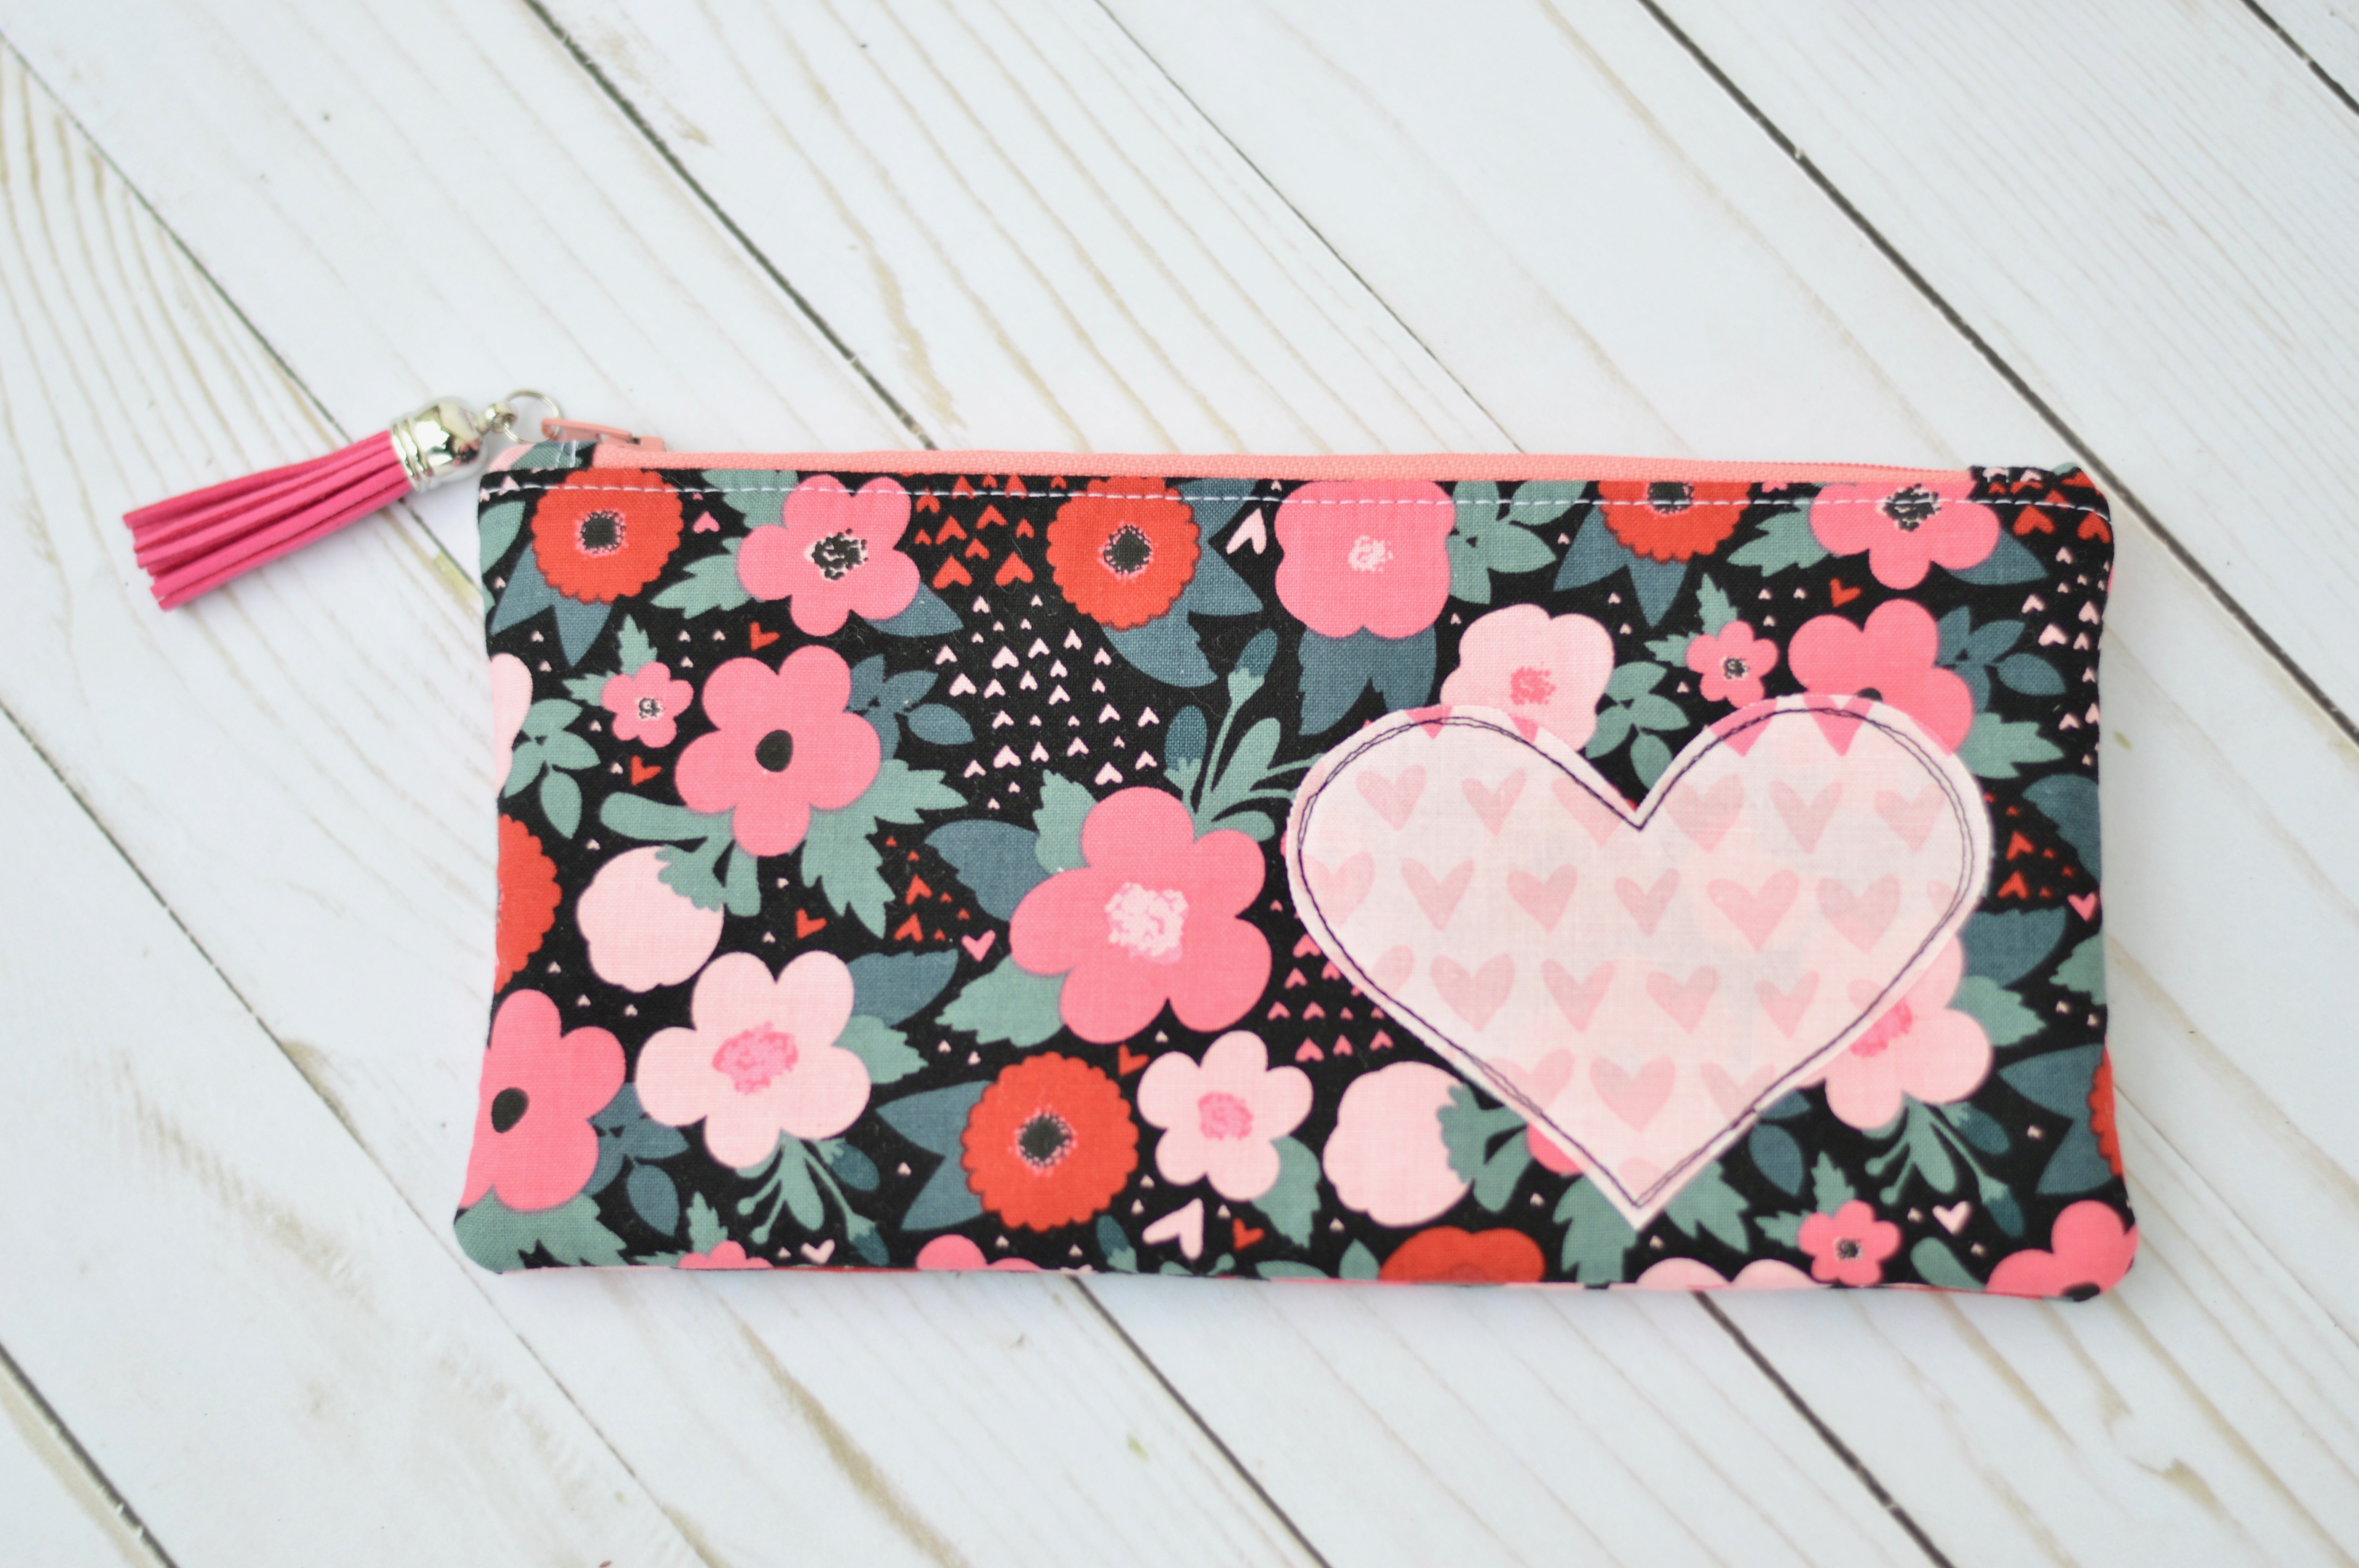 Heart Zipper pouch tutorial for Valentines